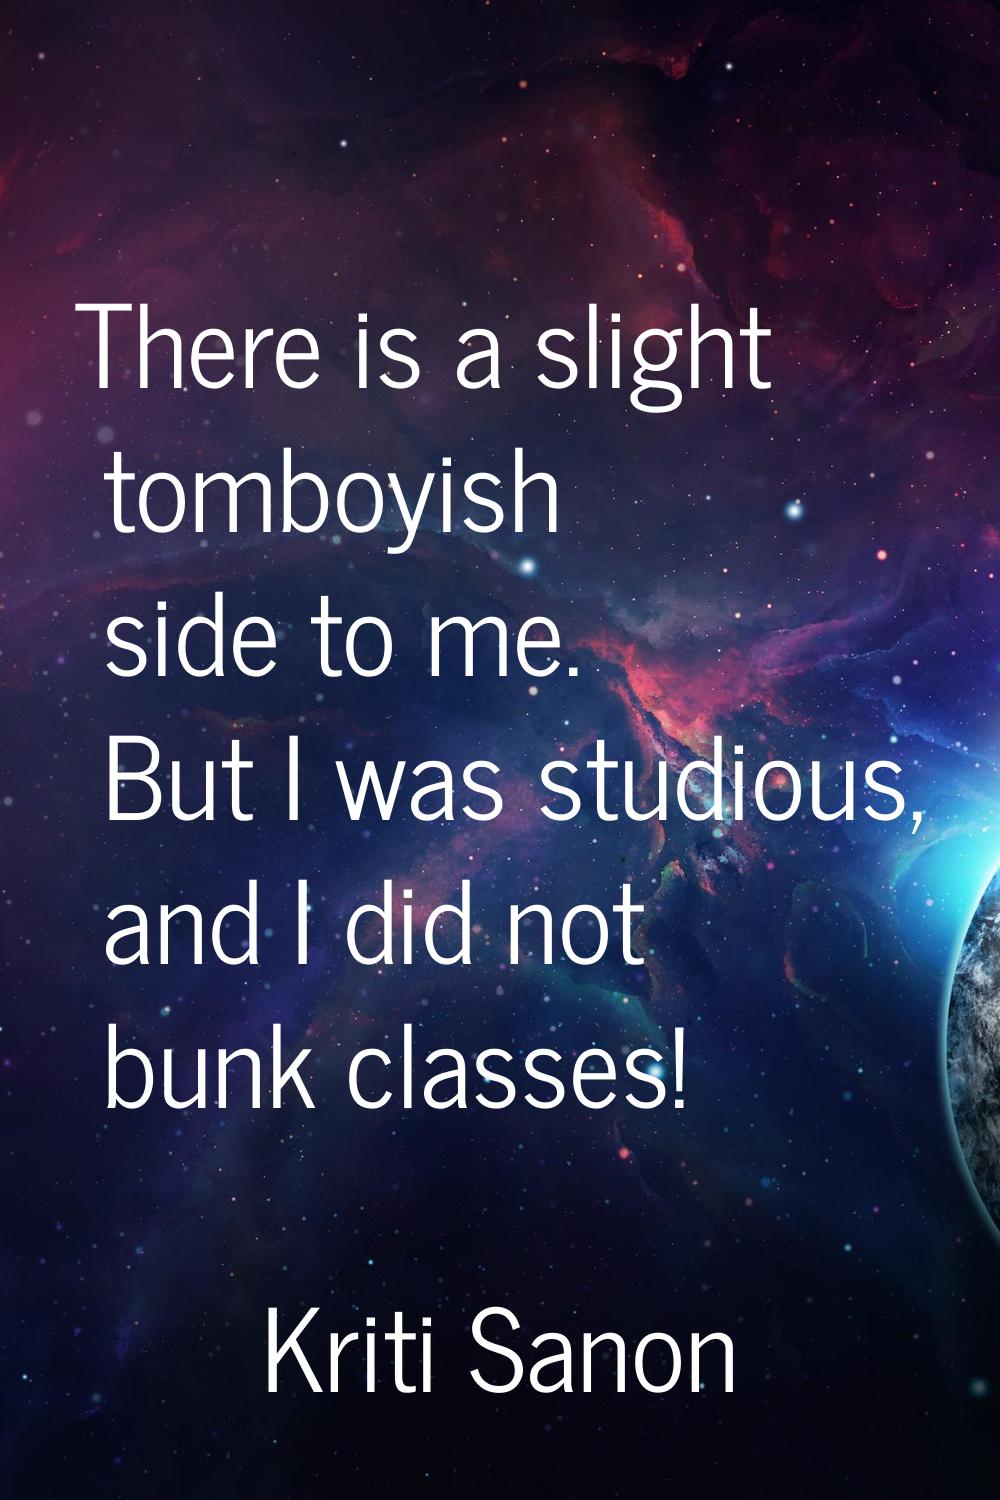 There is a slight tomboyish side to me. But I was studious, and I did not bunk classes!